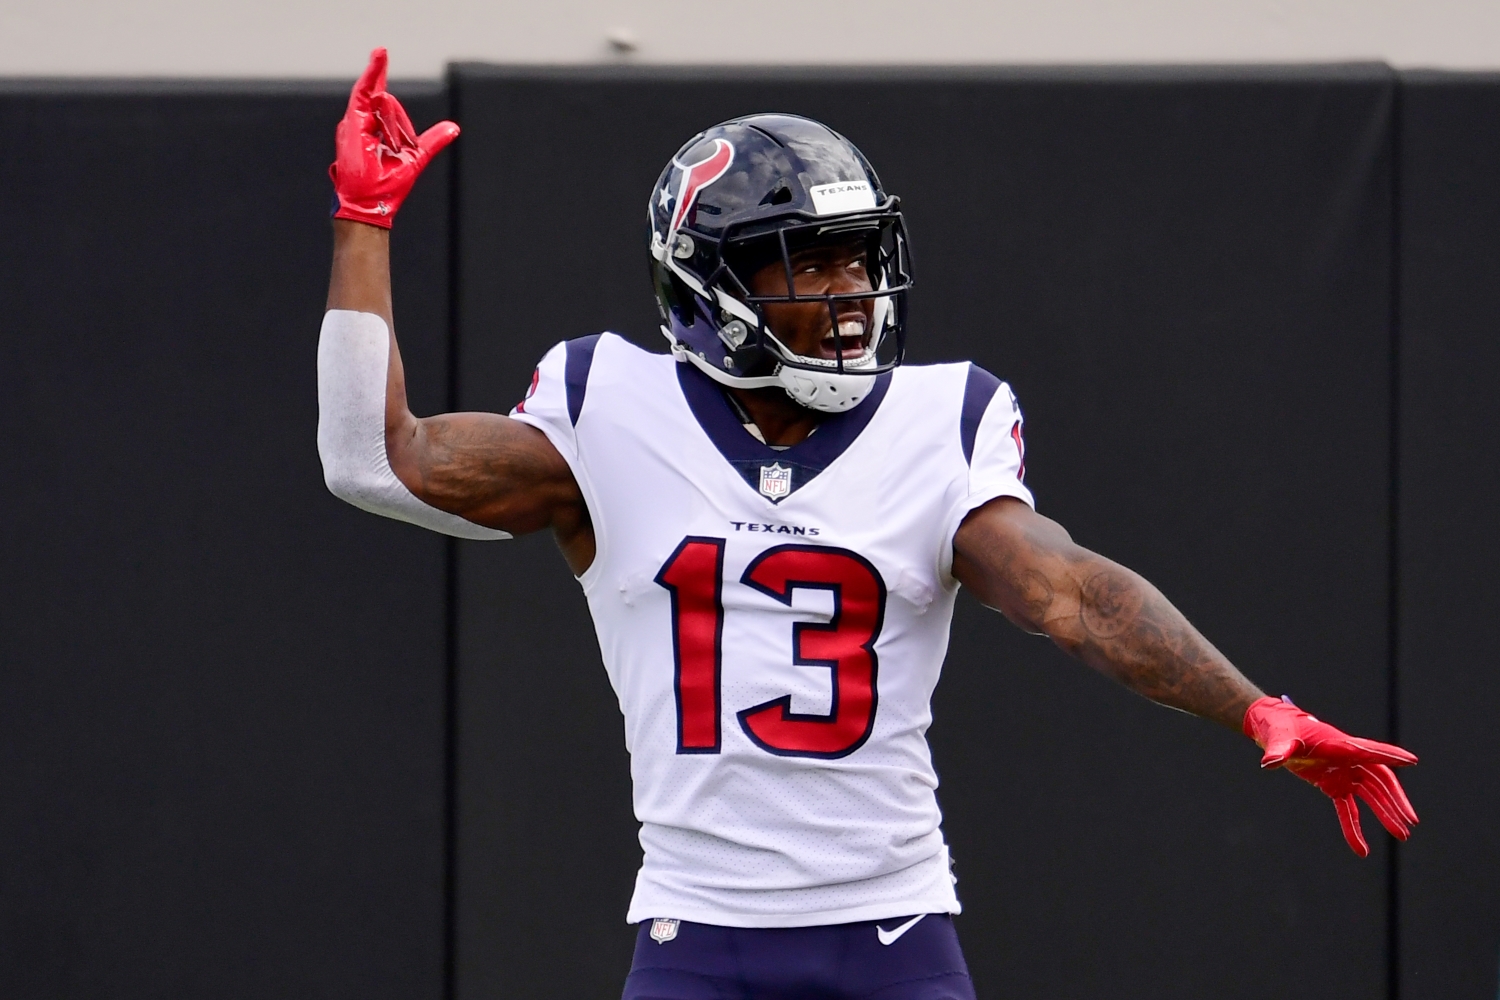 Brandin Cooks Just Sent a Strict Message to the Texans About His NFL Future